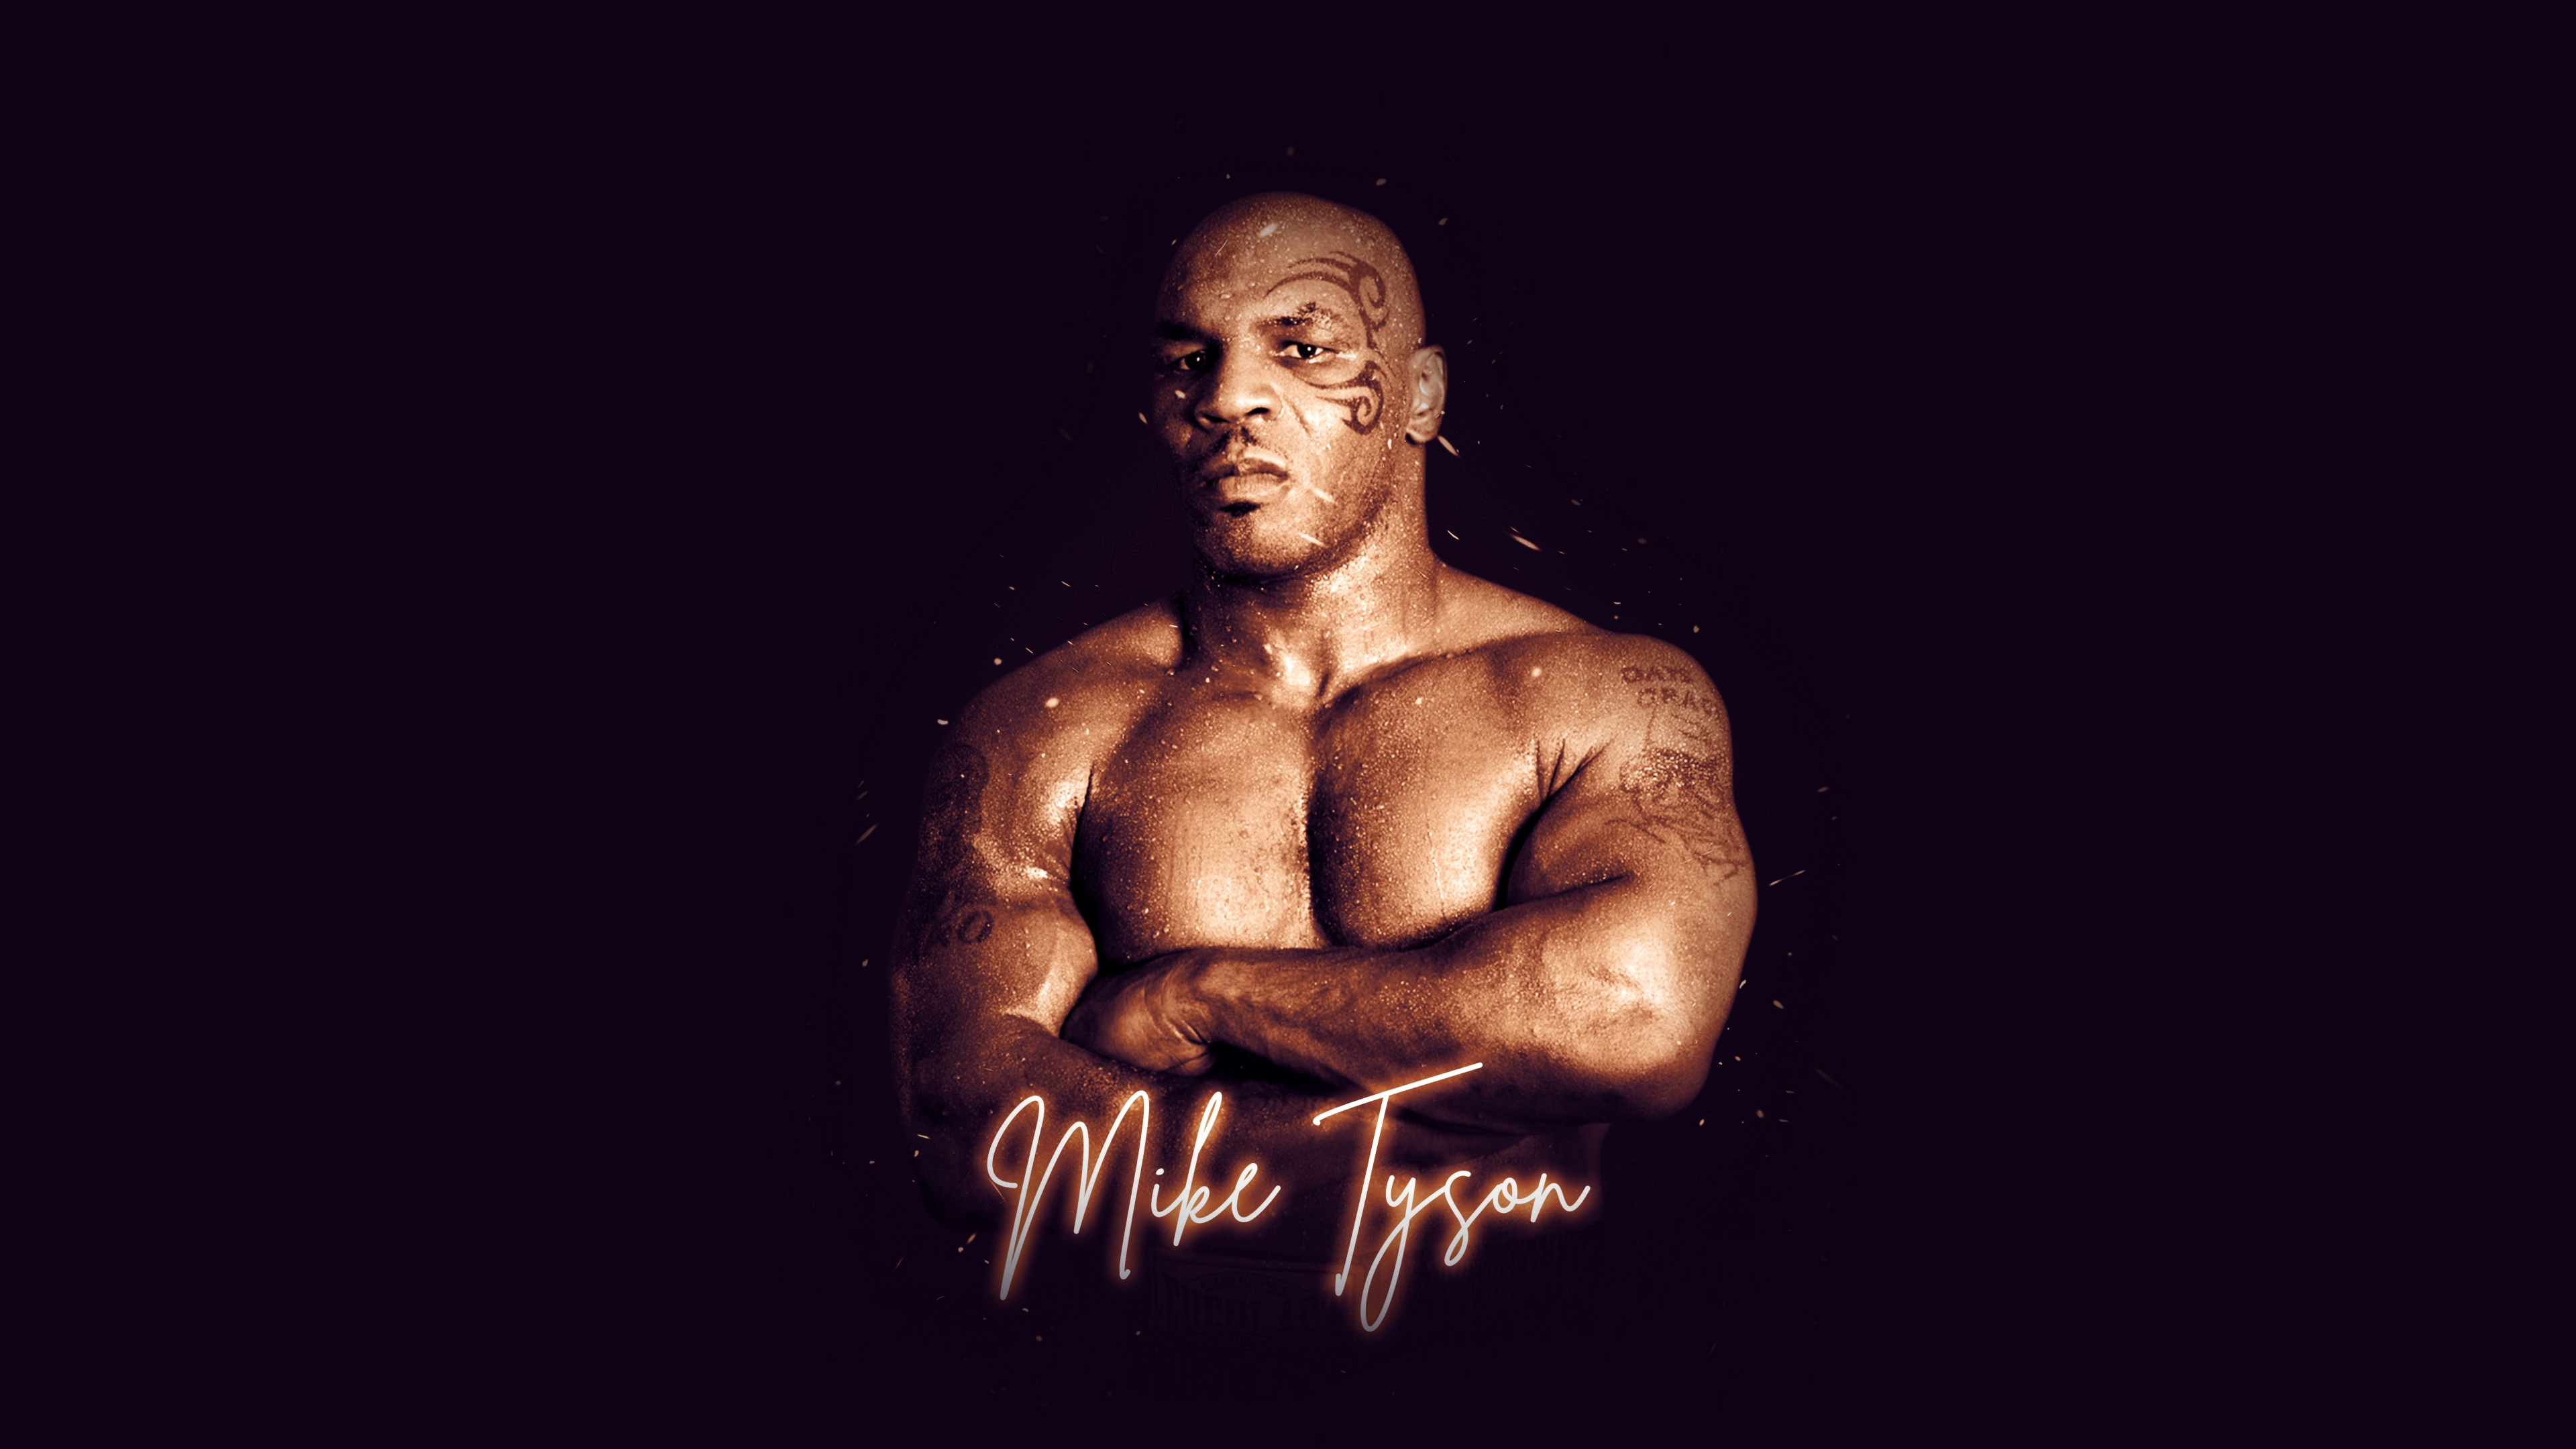 HD wallpaper: Mike Tyson, Sports, Boxing, one person, indoors, text, adult  | Wallpaper Flare